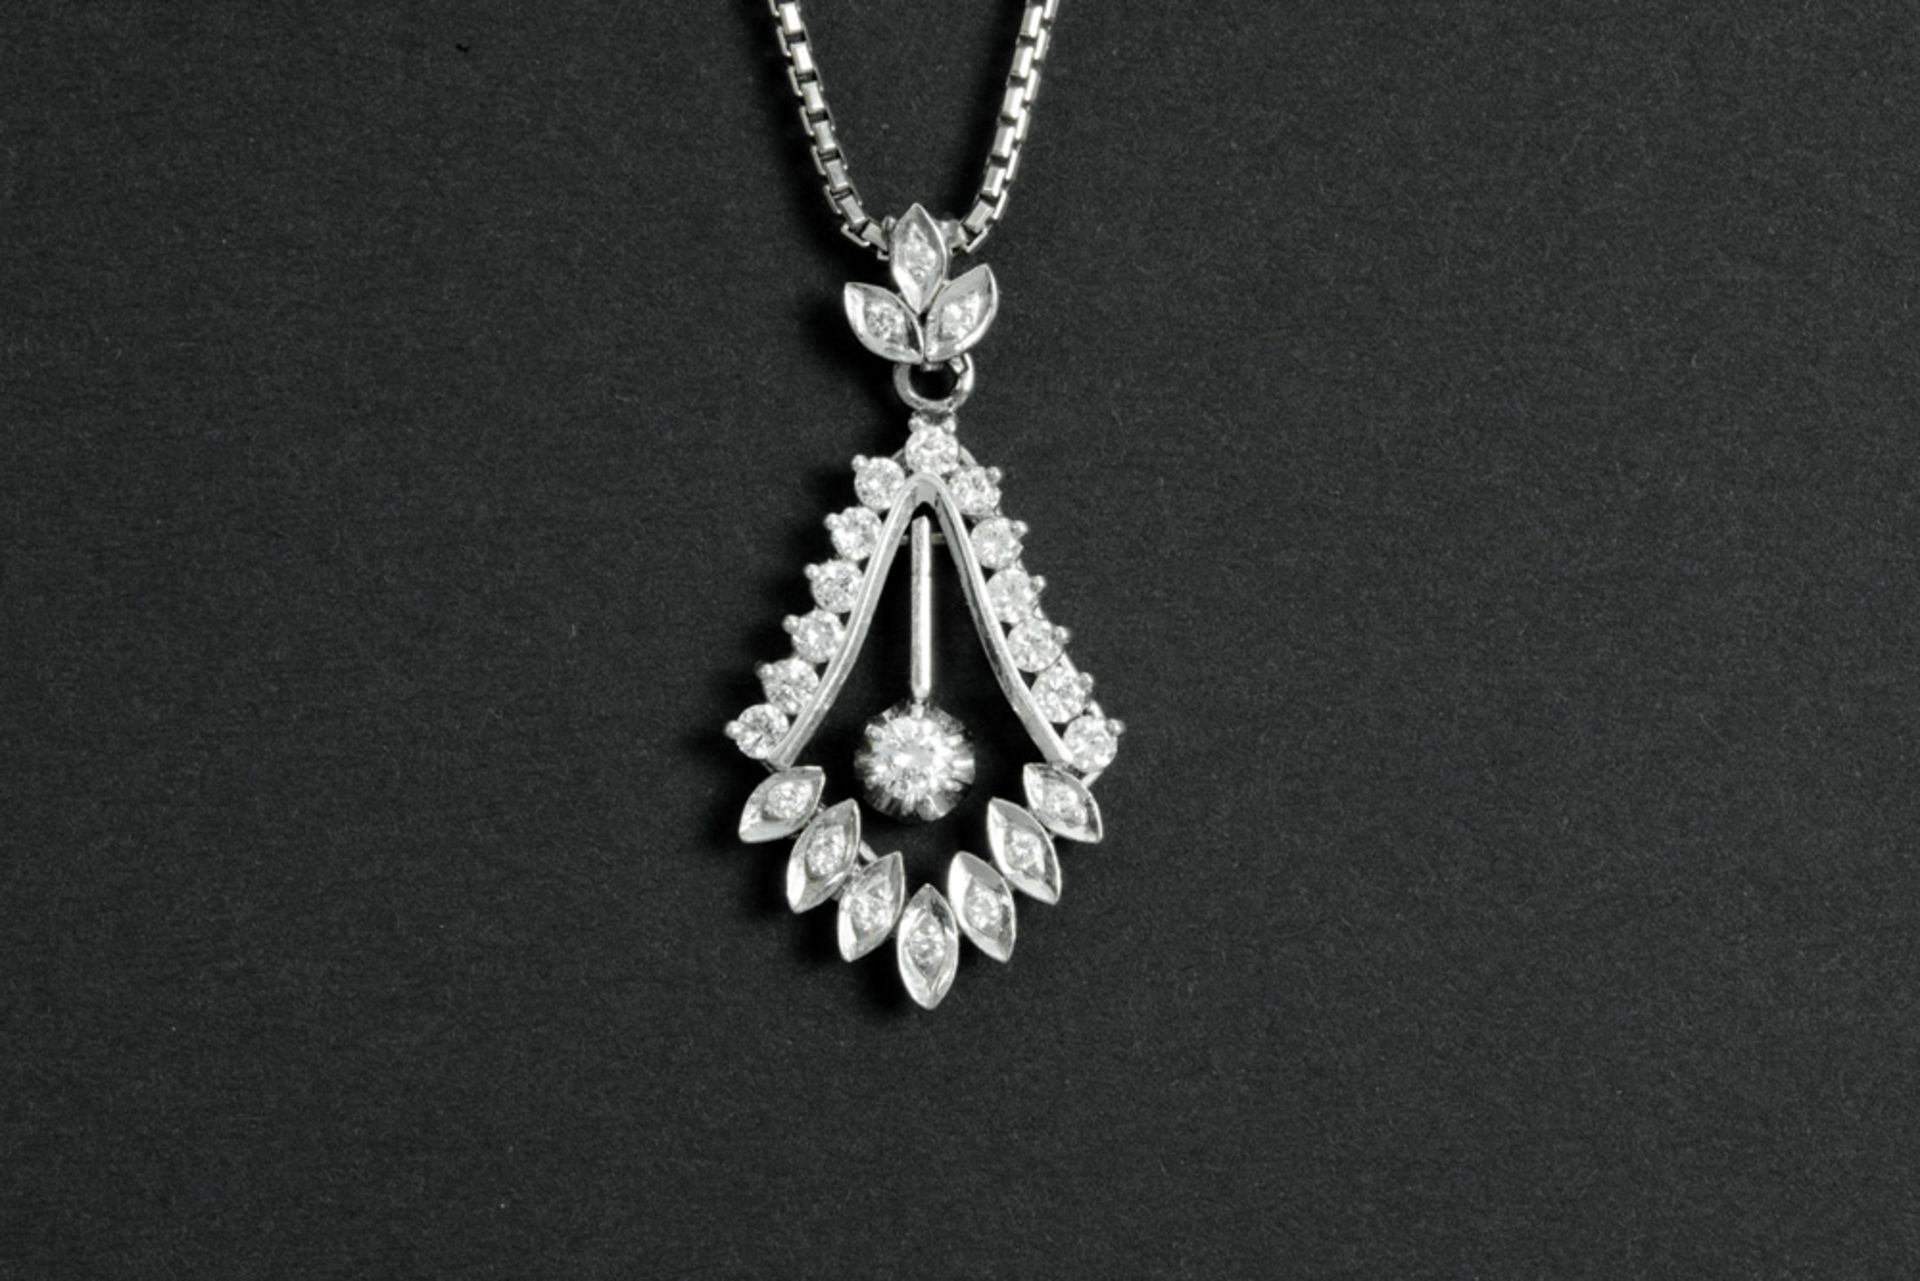 pendant in white gold (18 carat) with ca 0,60 carat of quality brilliant cut diamonds - with a chain